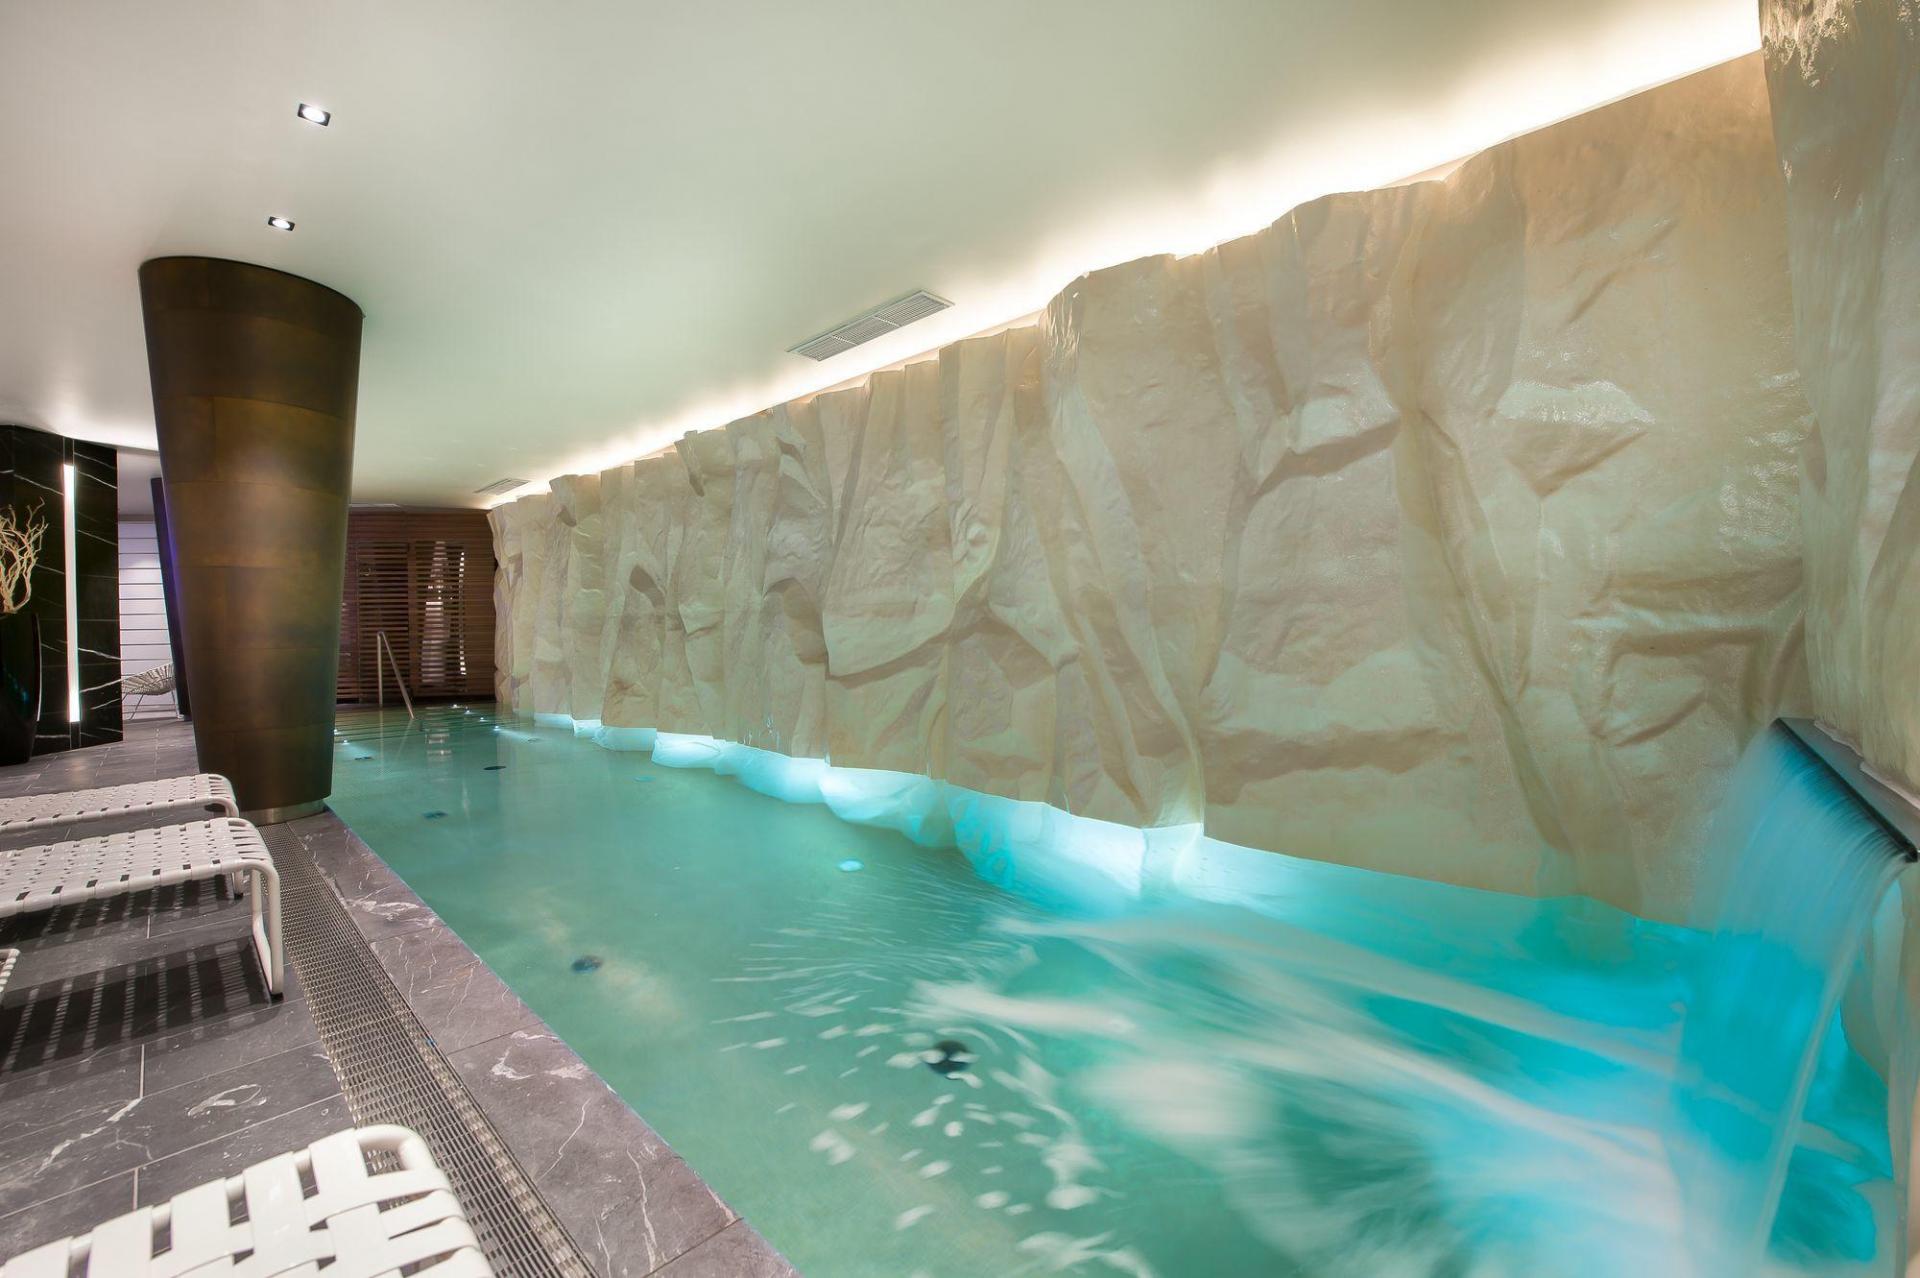 THE LONG SWIMMING POOL IN CHALET LE PALACE TO RELAX AFTER SKIING